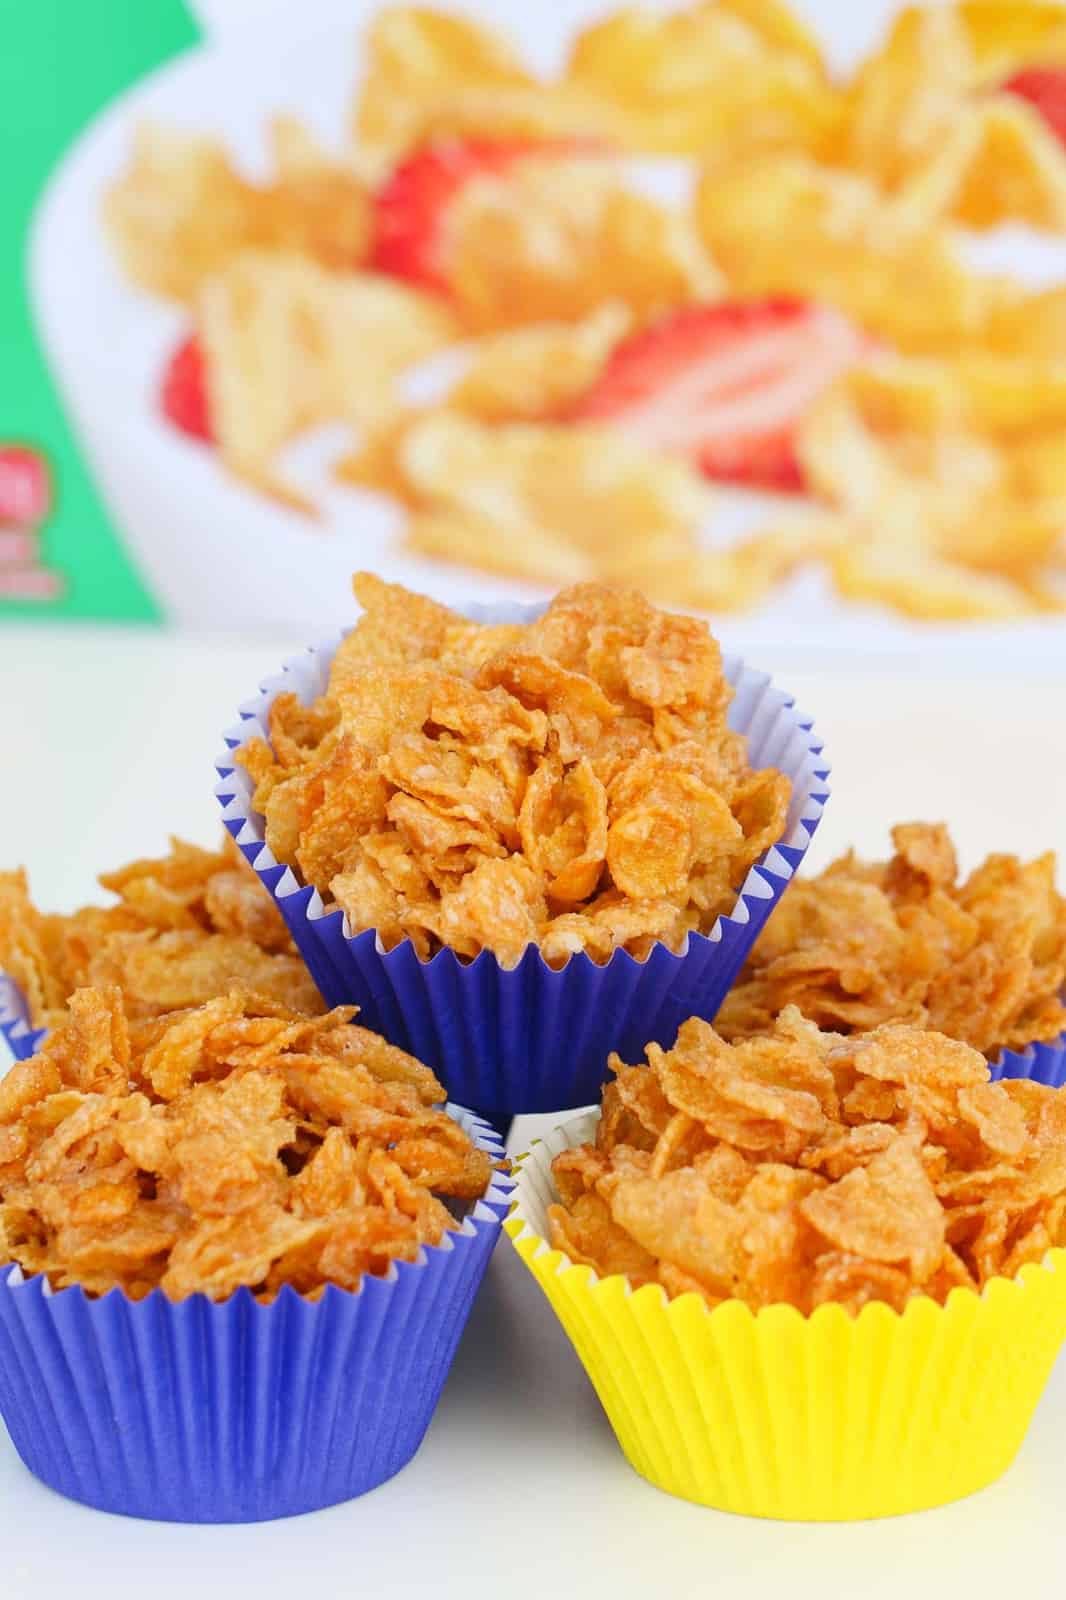 Five Honey Joys in coloured cases with a box of Corn Flakes in the background.